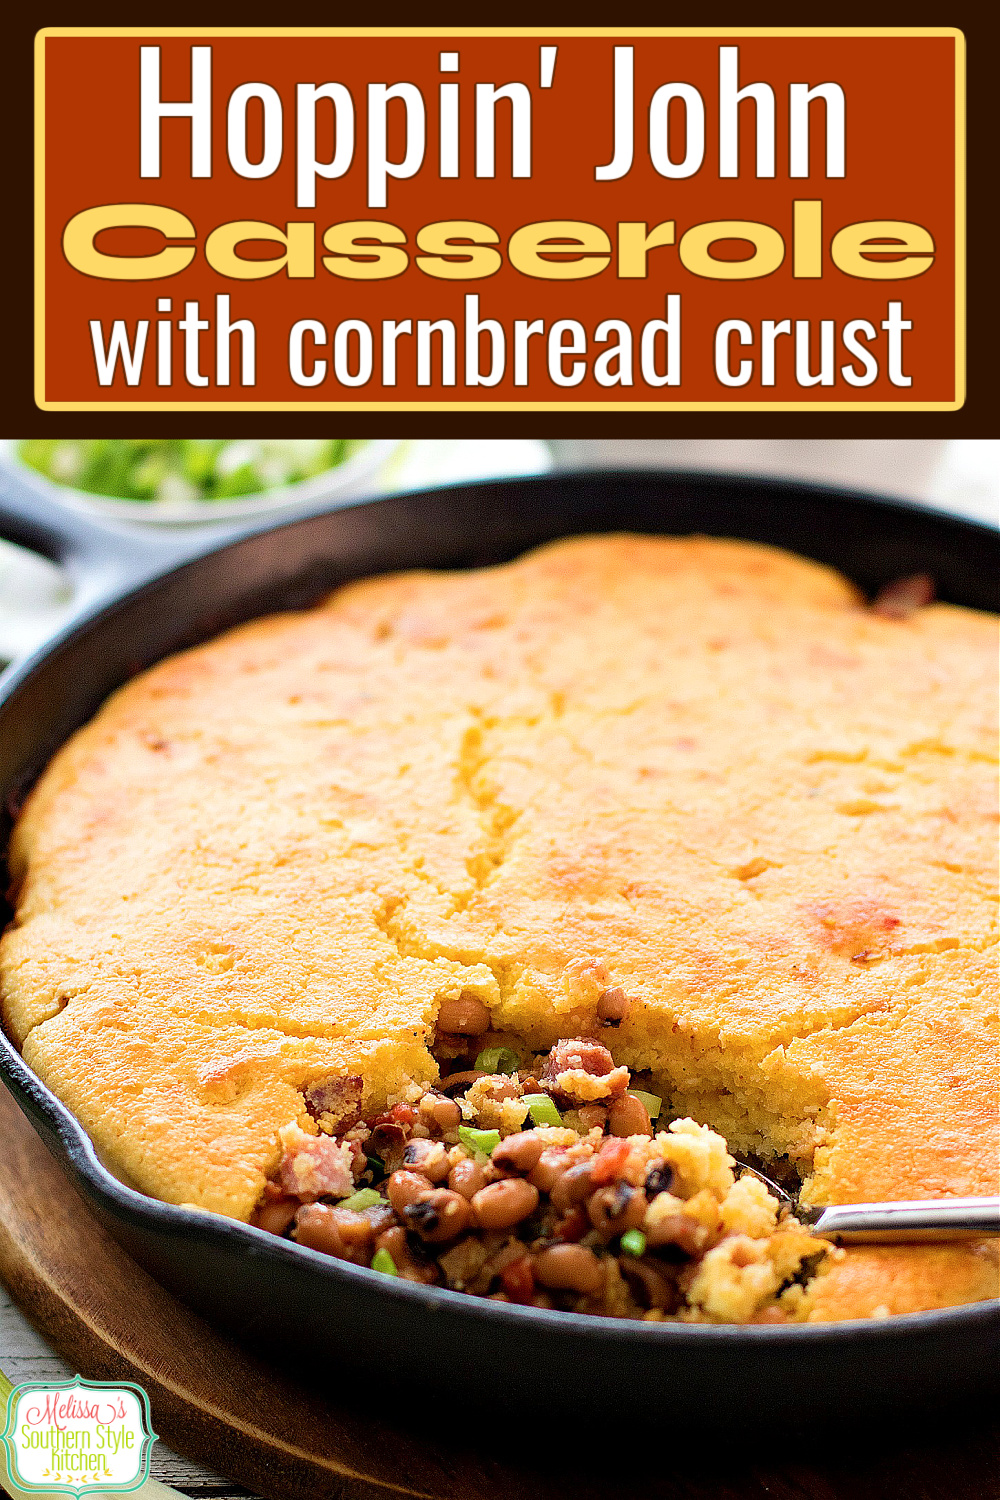 This Hoppin' John Casserole with Cornbread Crust skips rice and opts for a cornbread topping instead! #hoppinjohn #blackeyedpeas #cornbread #dinner #dinnerideas #southernrecipes #newyearsrecipes #newyearsday #southernfood #casseroles via @melissasssk